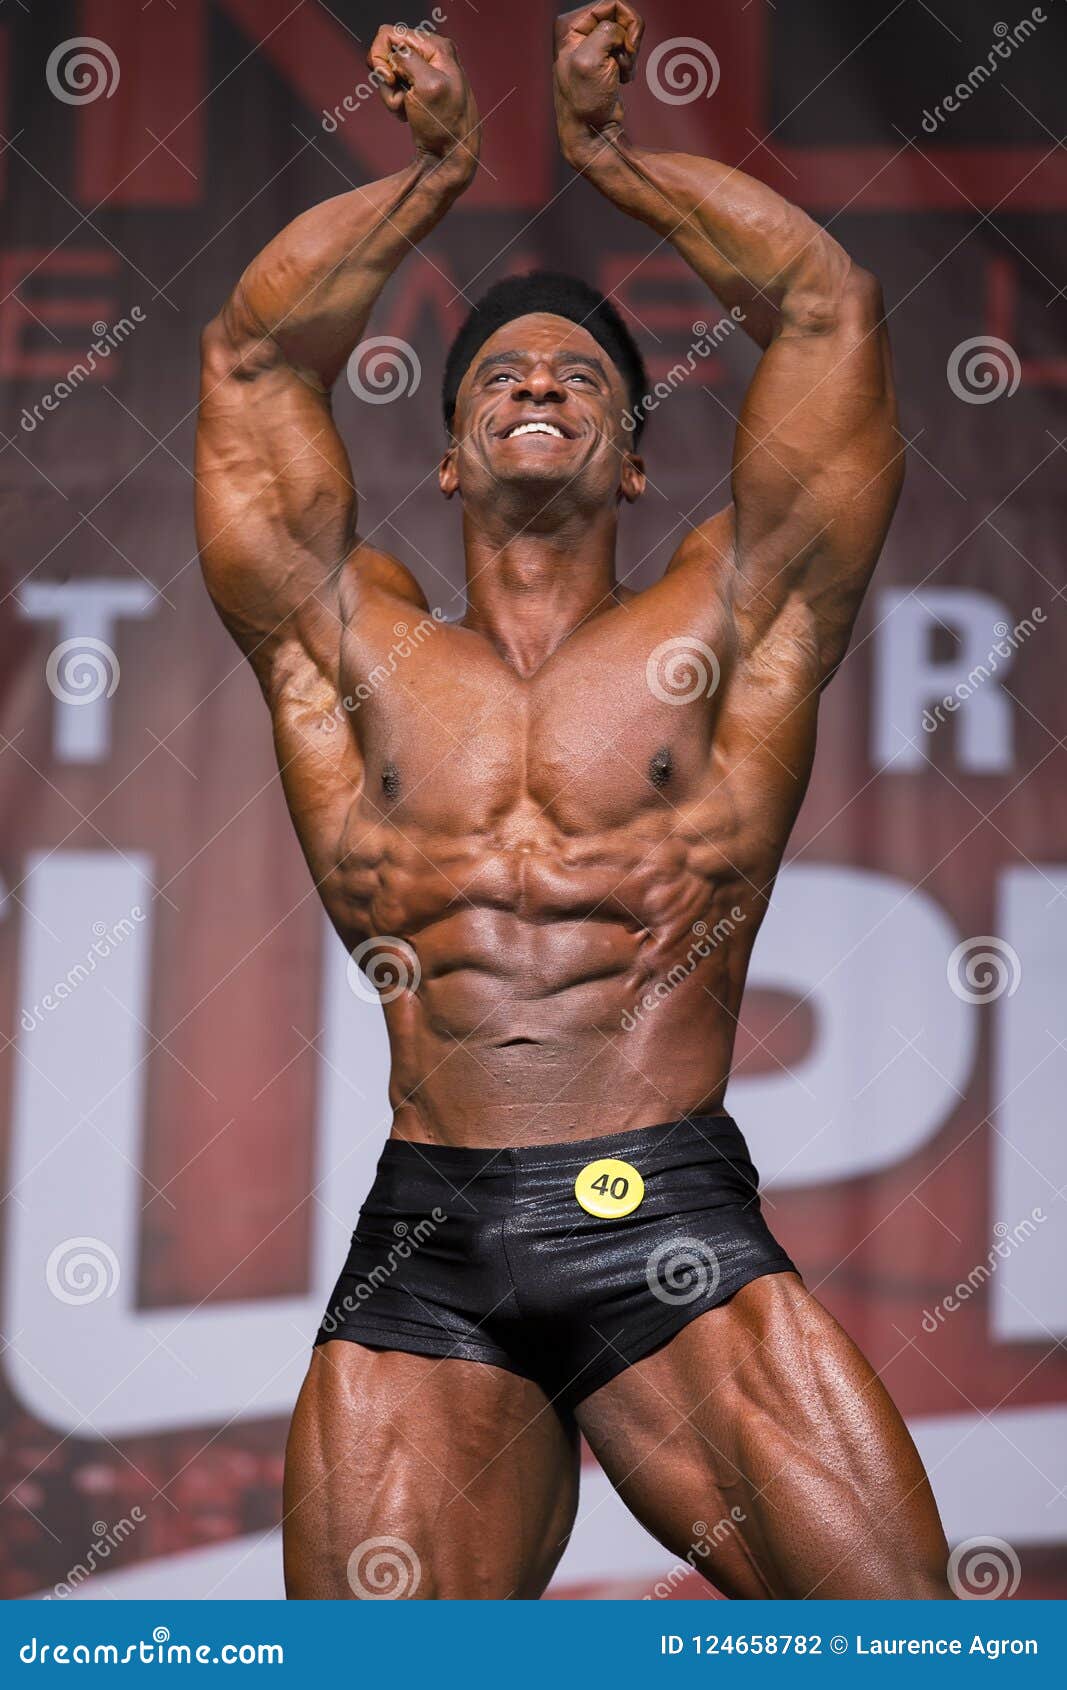 Berry de Mey - Bodybuilding in the 80ties was Classic Physique of today or  Men's Physique is posing trunks? If you haven't seen the athletes of the  golden era in real and